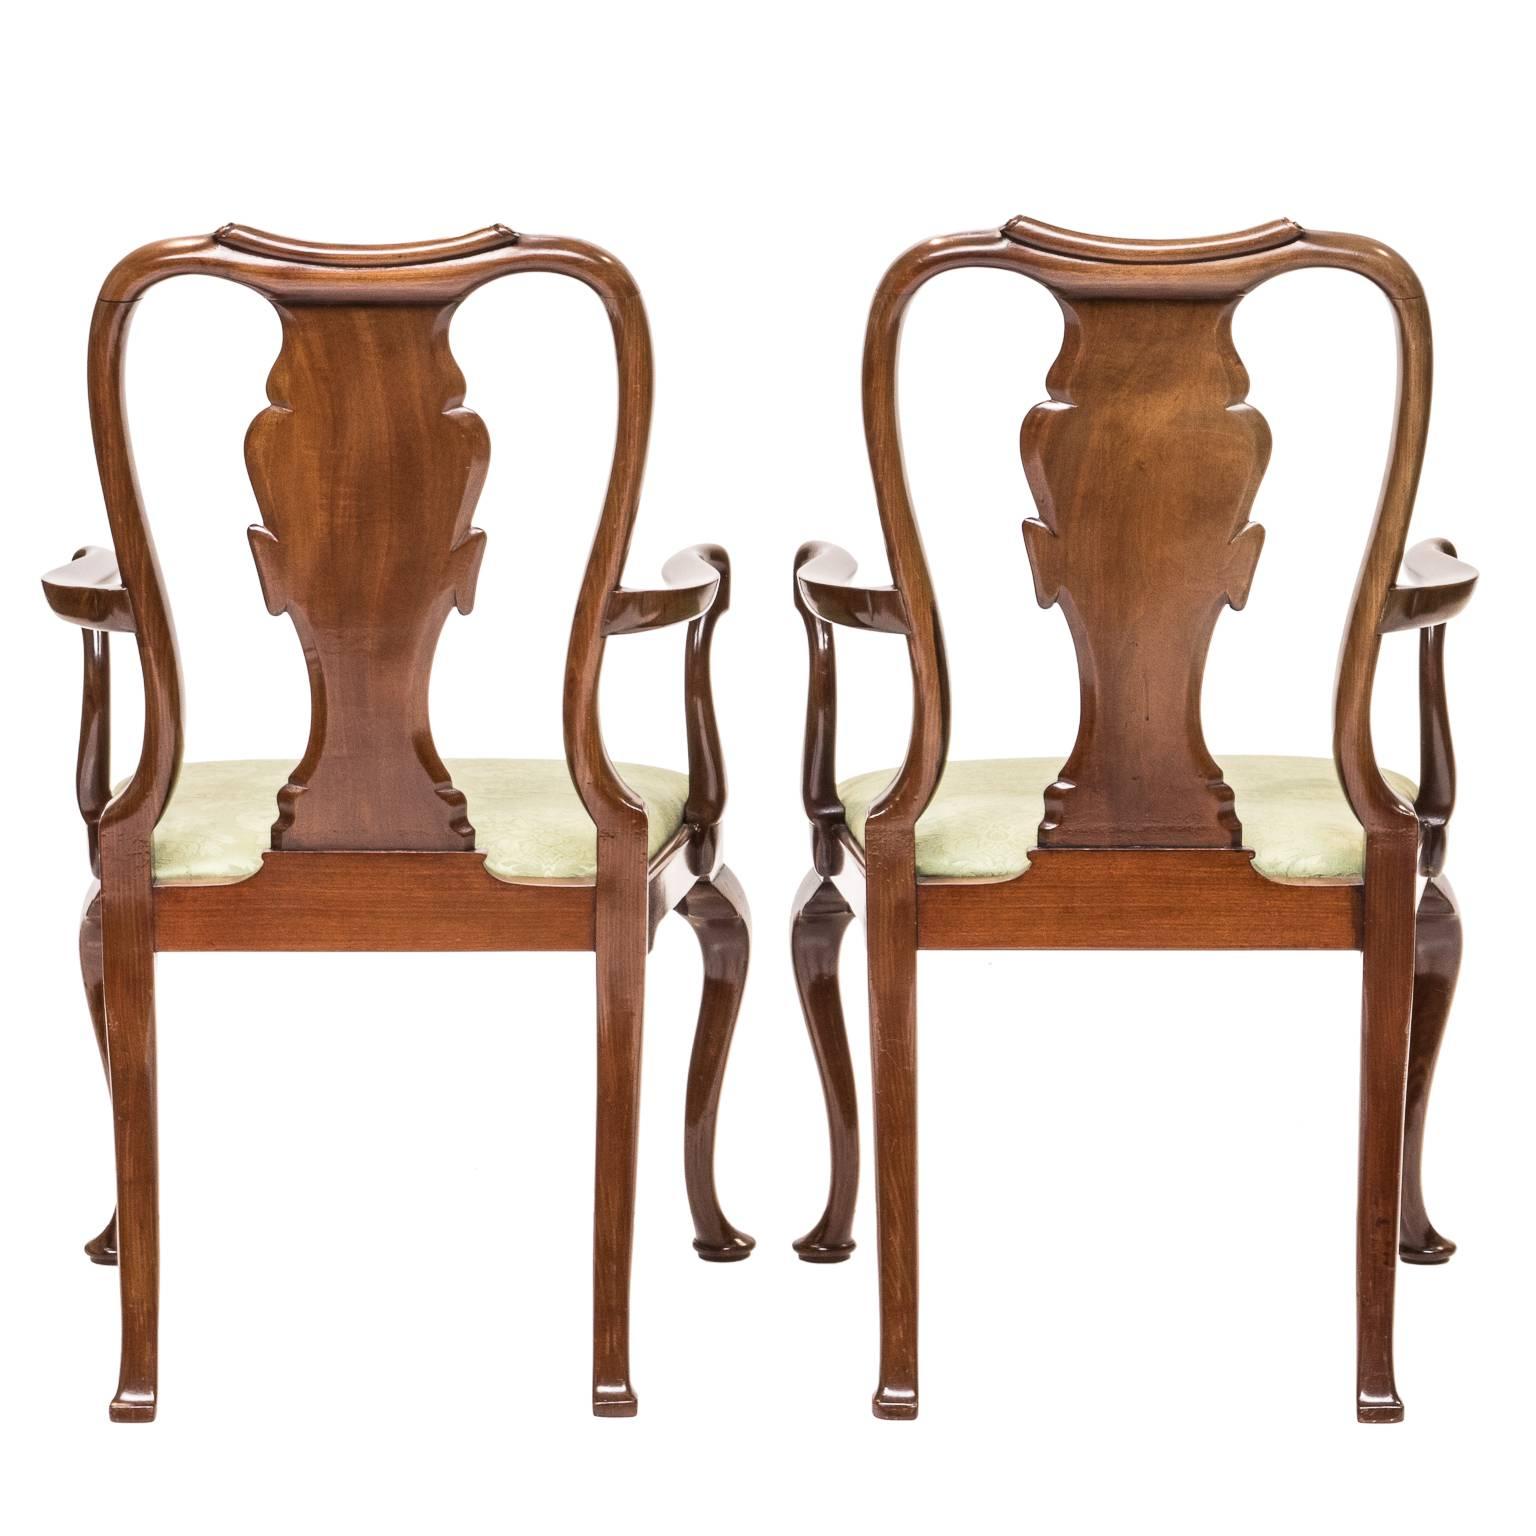 English Pair of 19th Century Queen Anne Childs Chairs